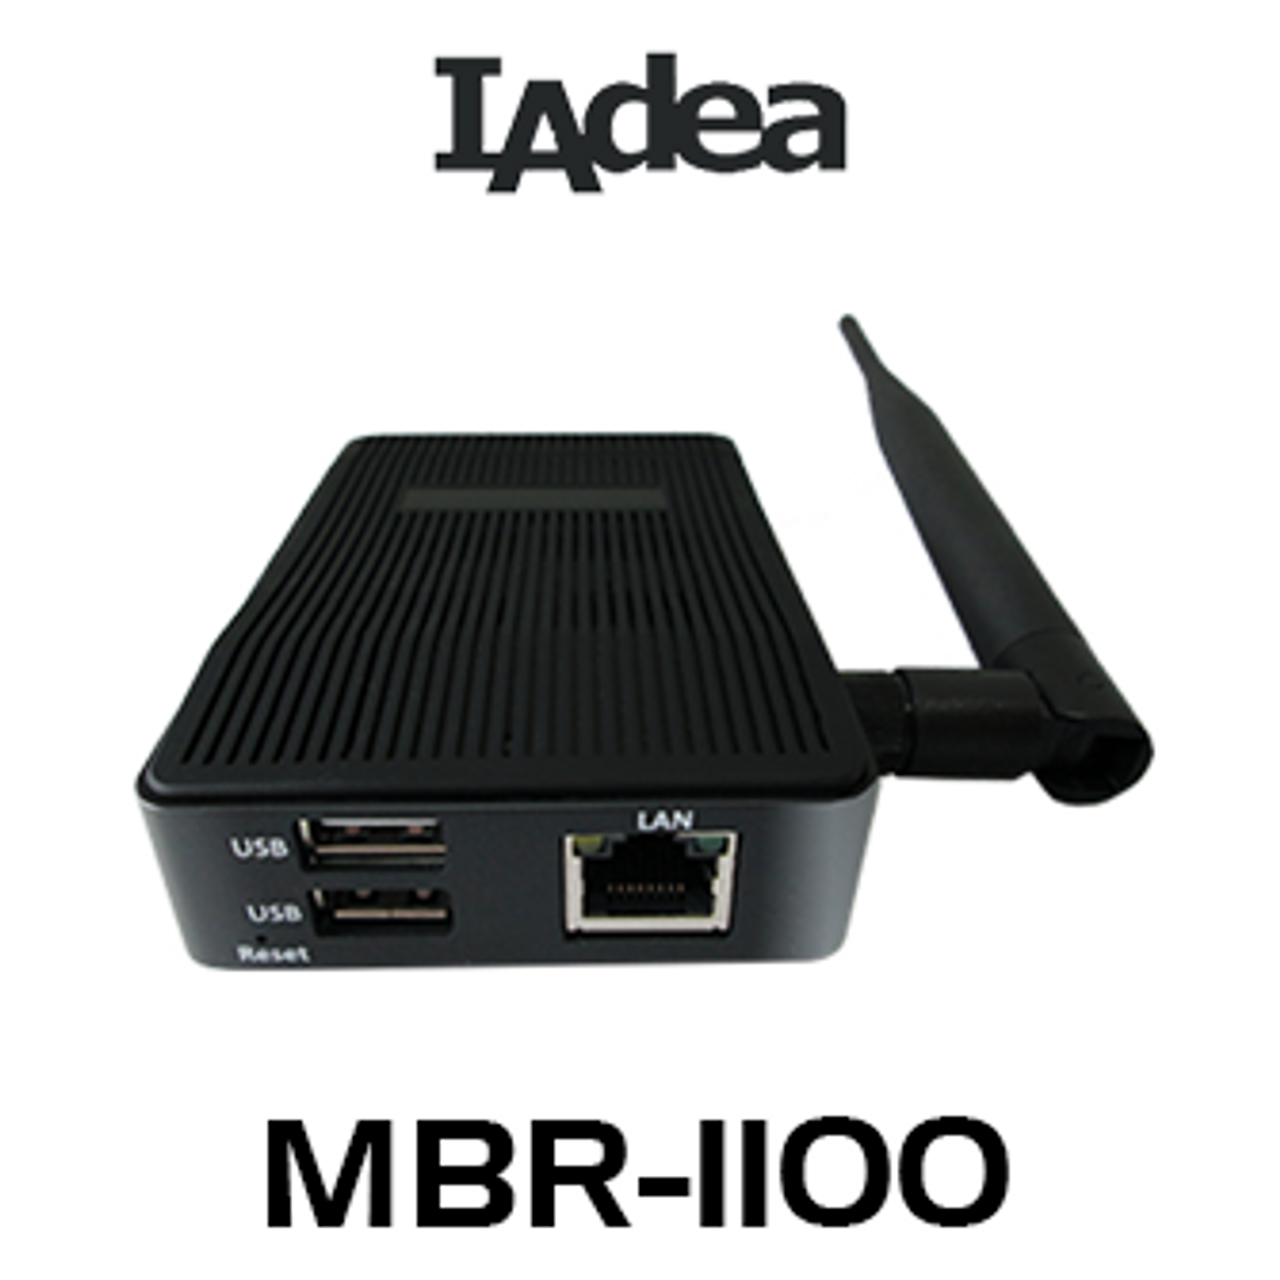 IAdea MBR-1100 Solid State Full HD Signage Media Player